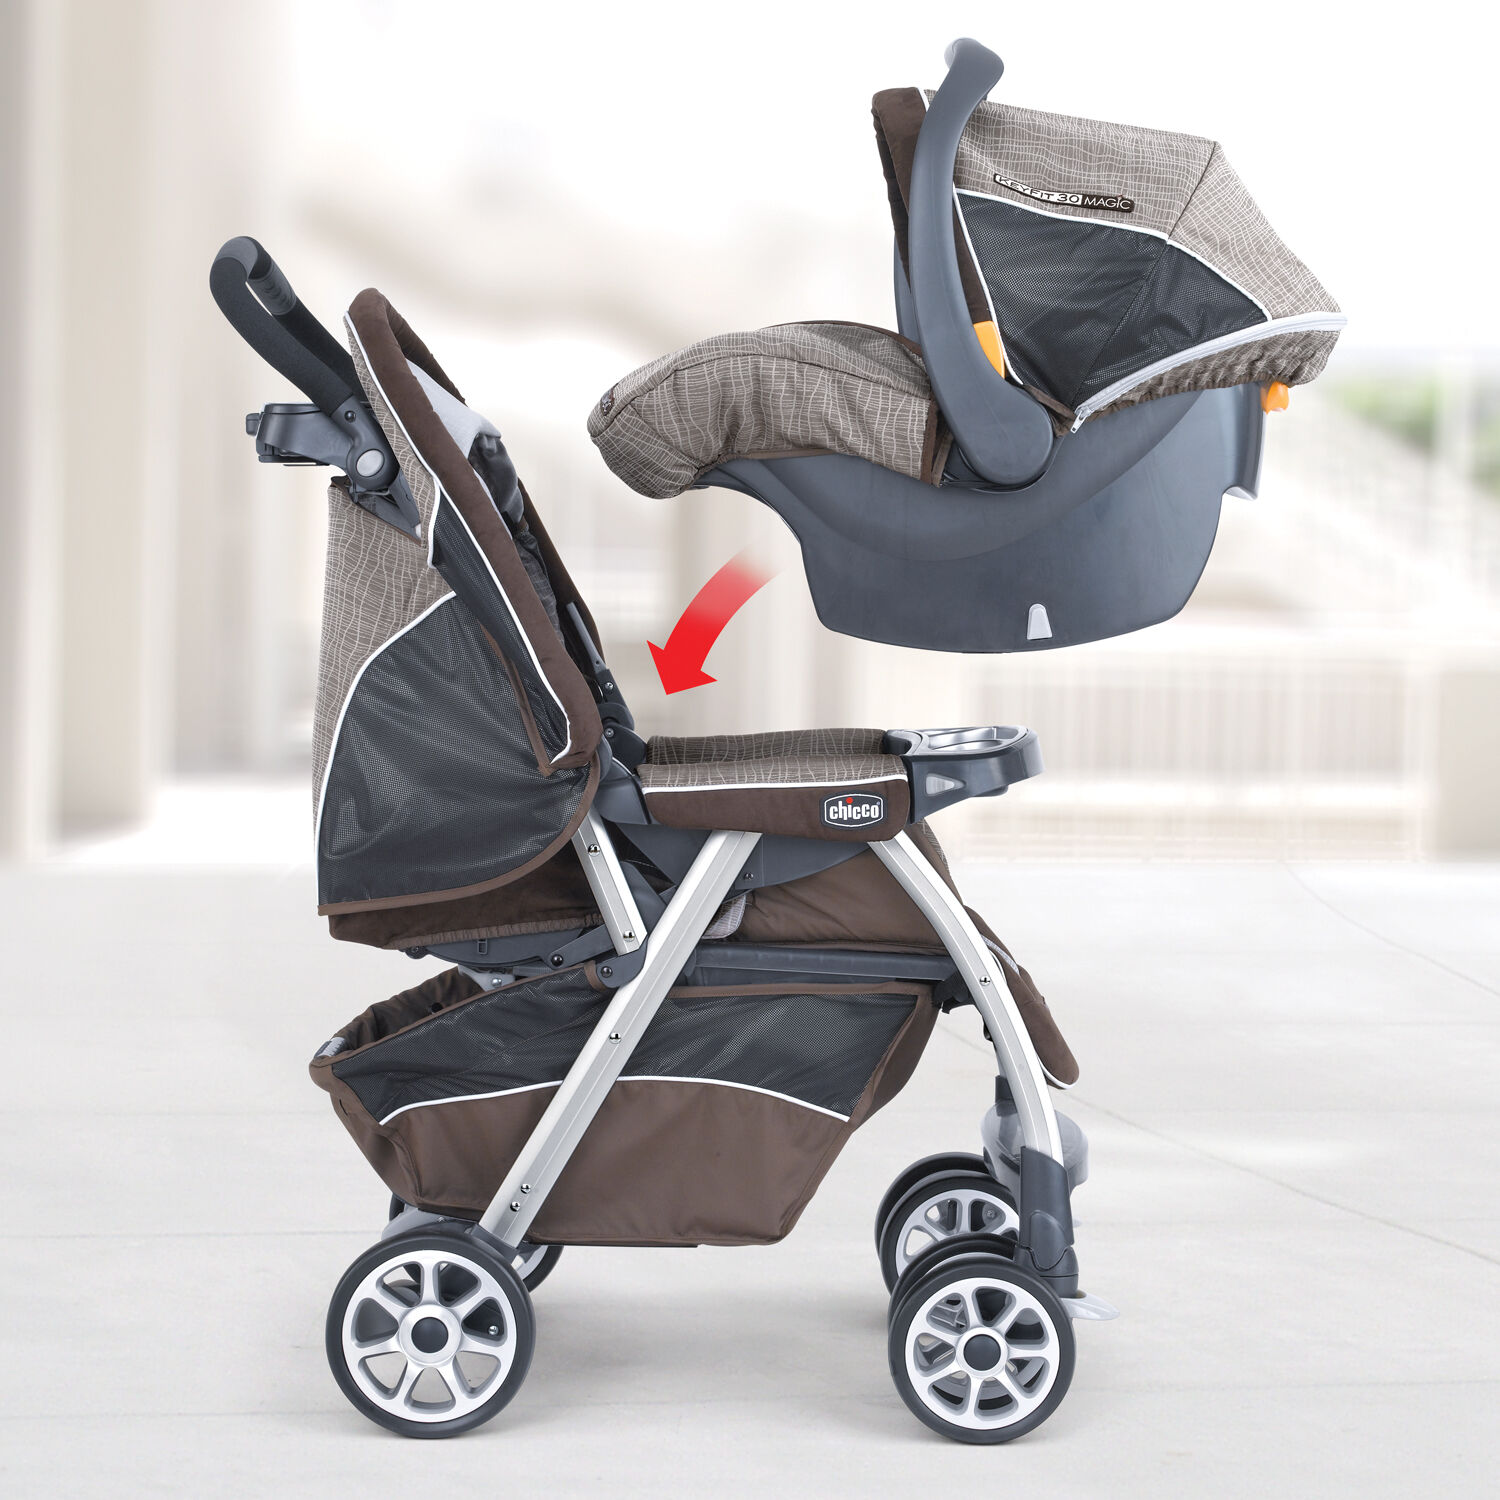 chicco cortina travel system